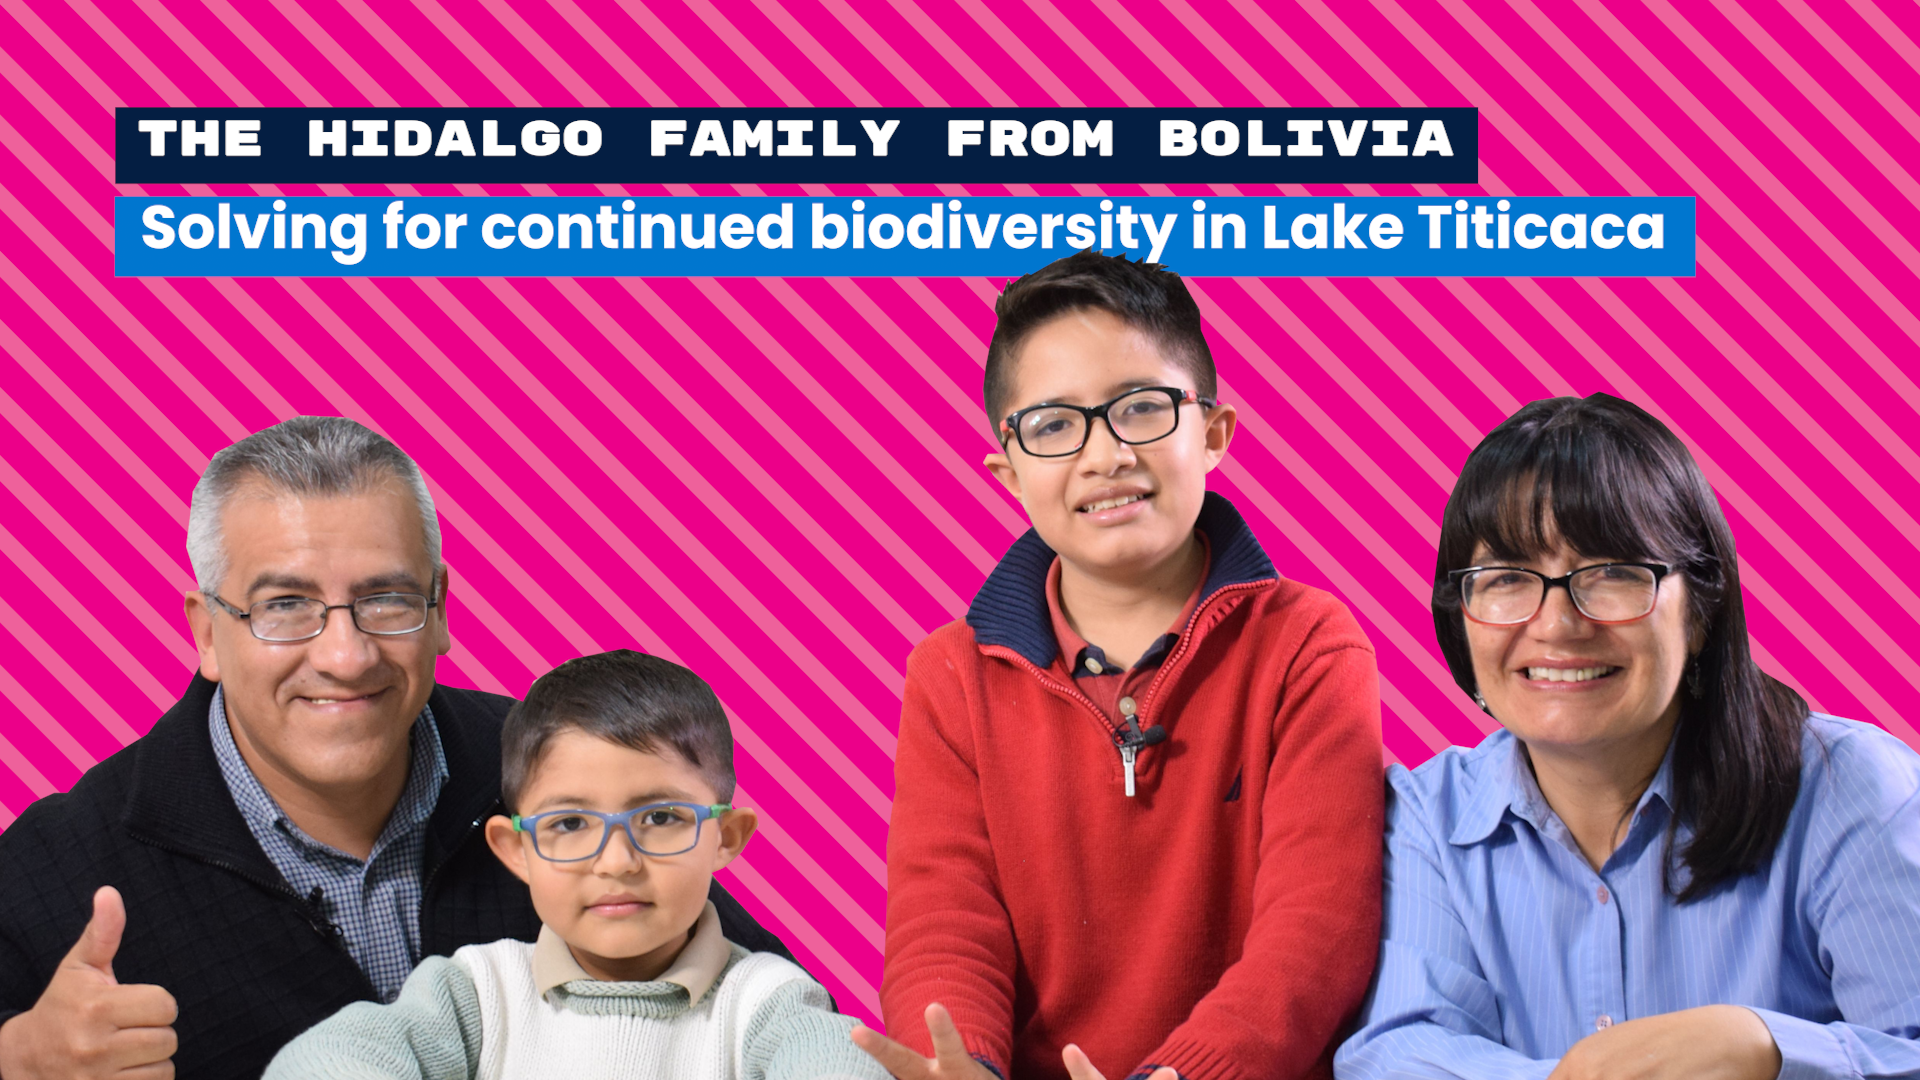 Technovation Global Problem Solvers: Hidalgo family from Bolivia pose together, image on a bright pink background